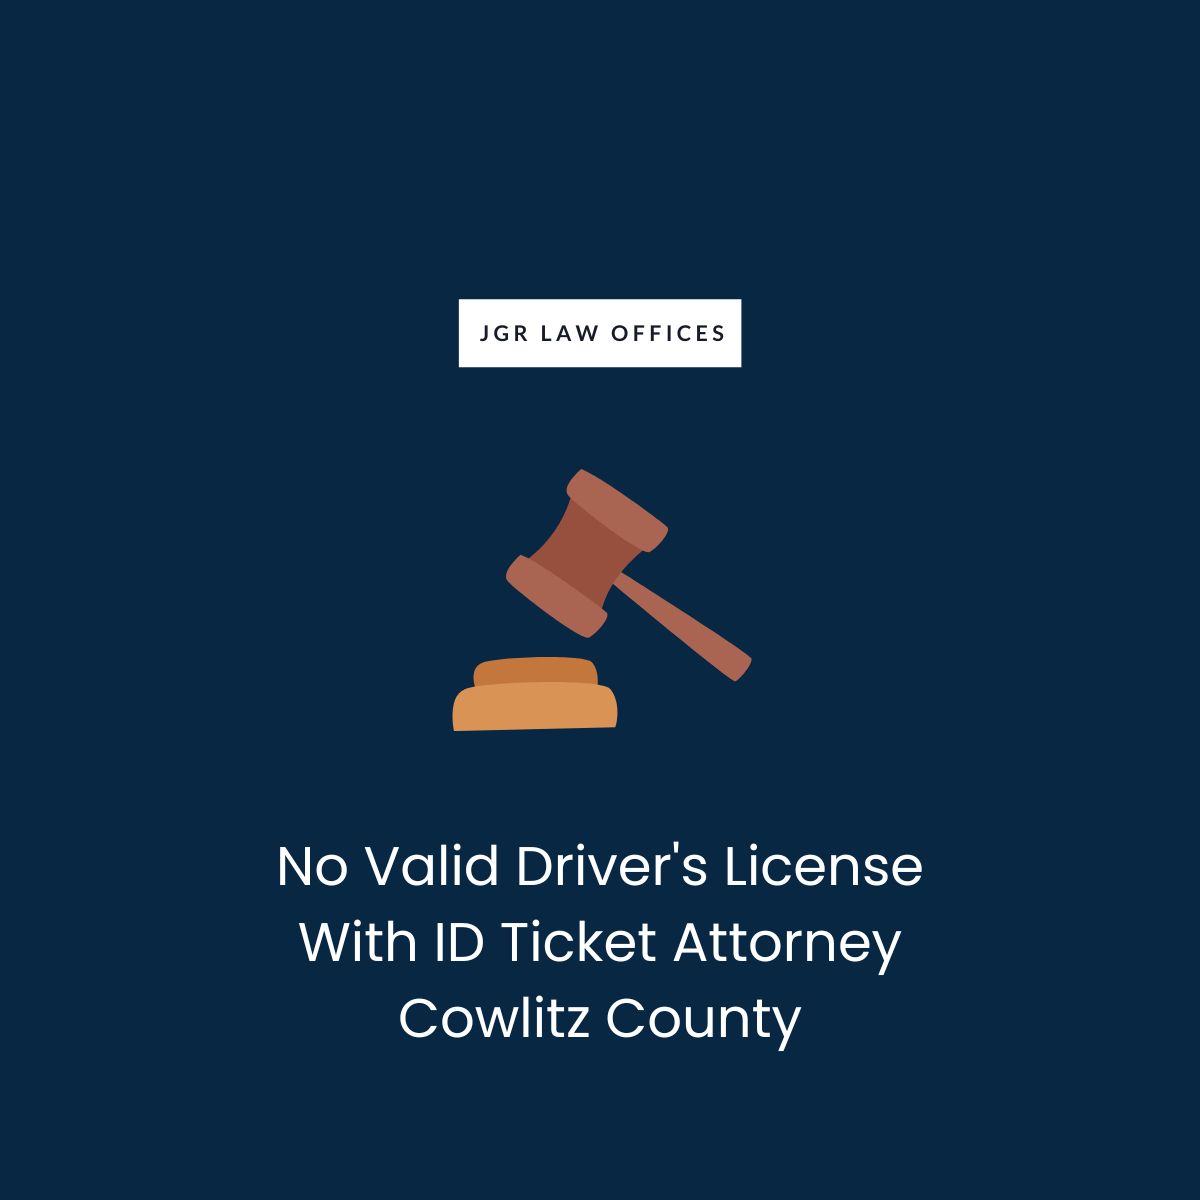 No Valid Driver's License With ID Ticket Attorney Cowlitz County